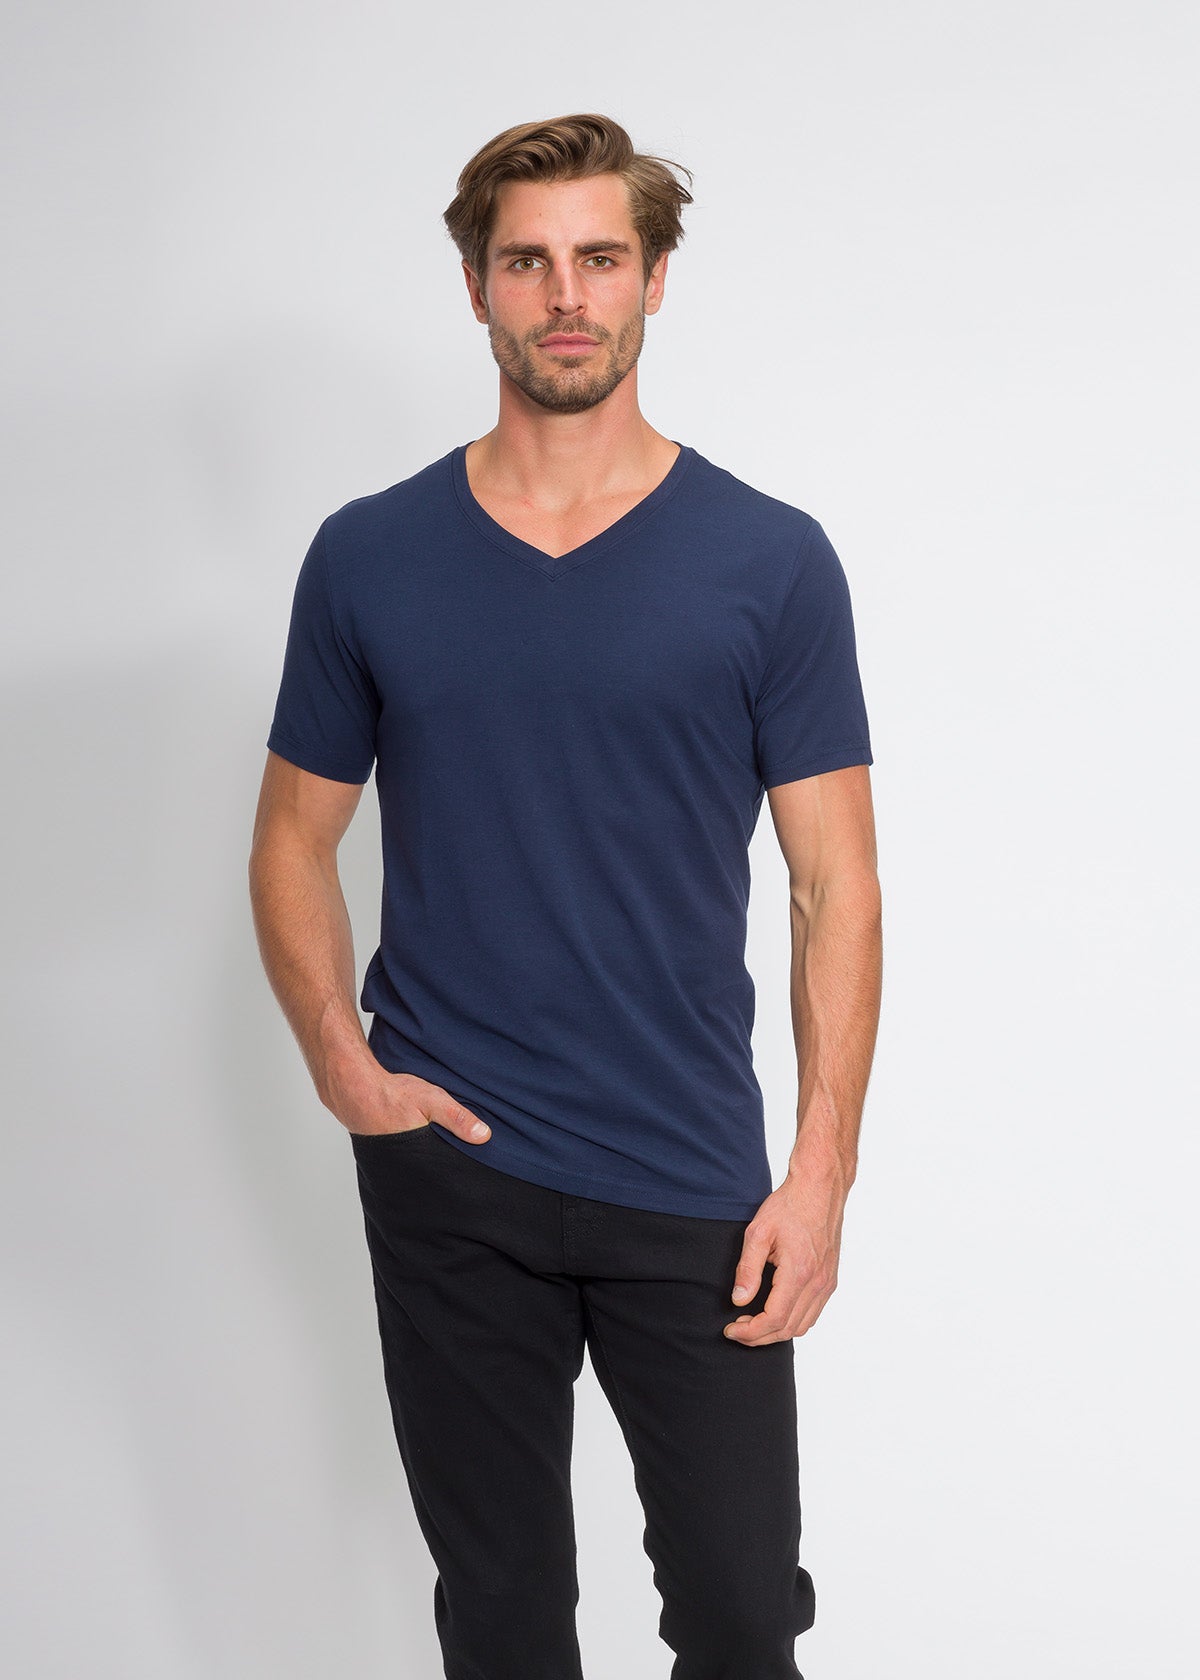 Suit With V Neck: How to Rock It – The Classic T-Shirt Company